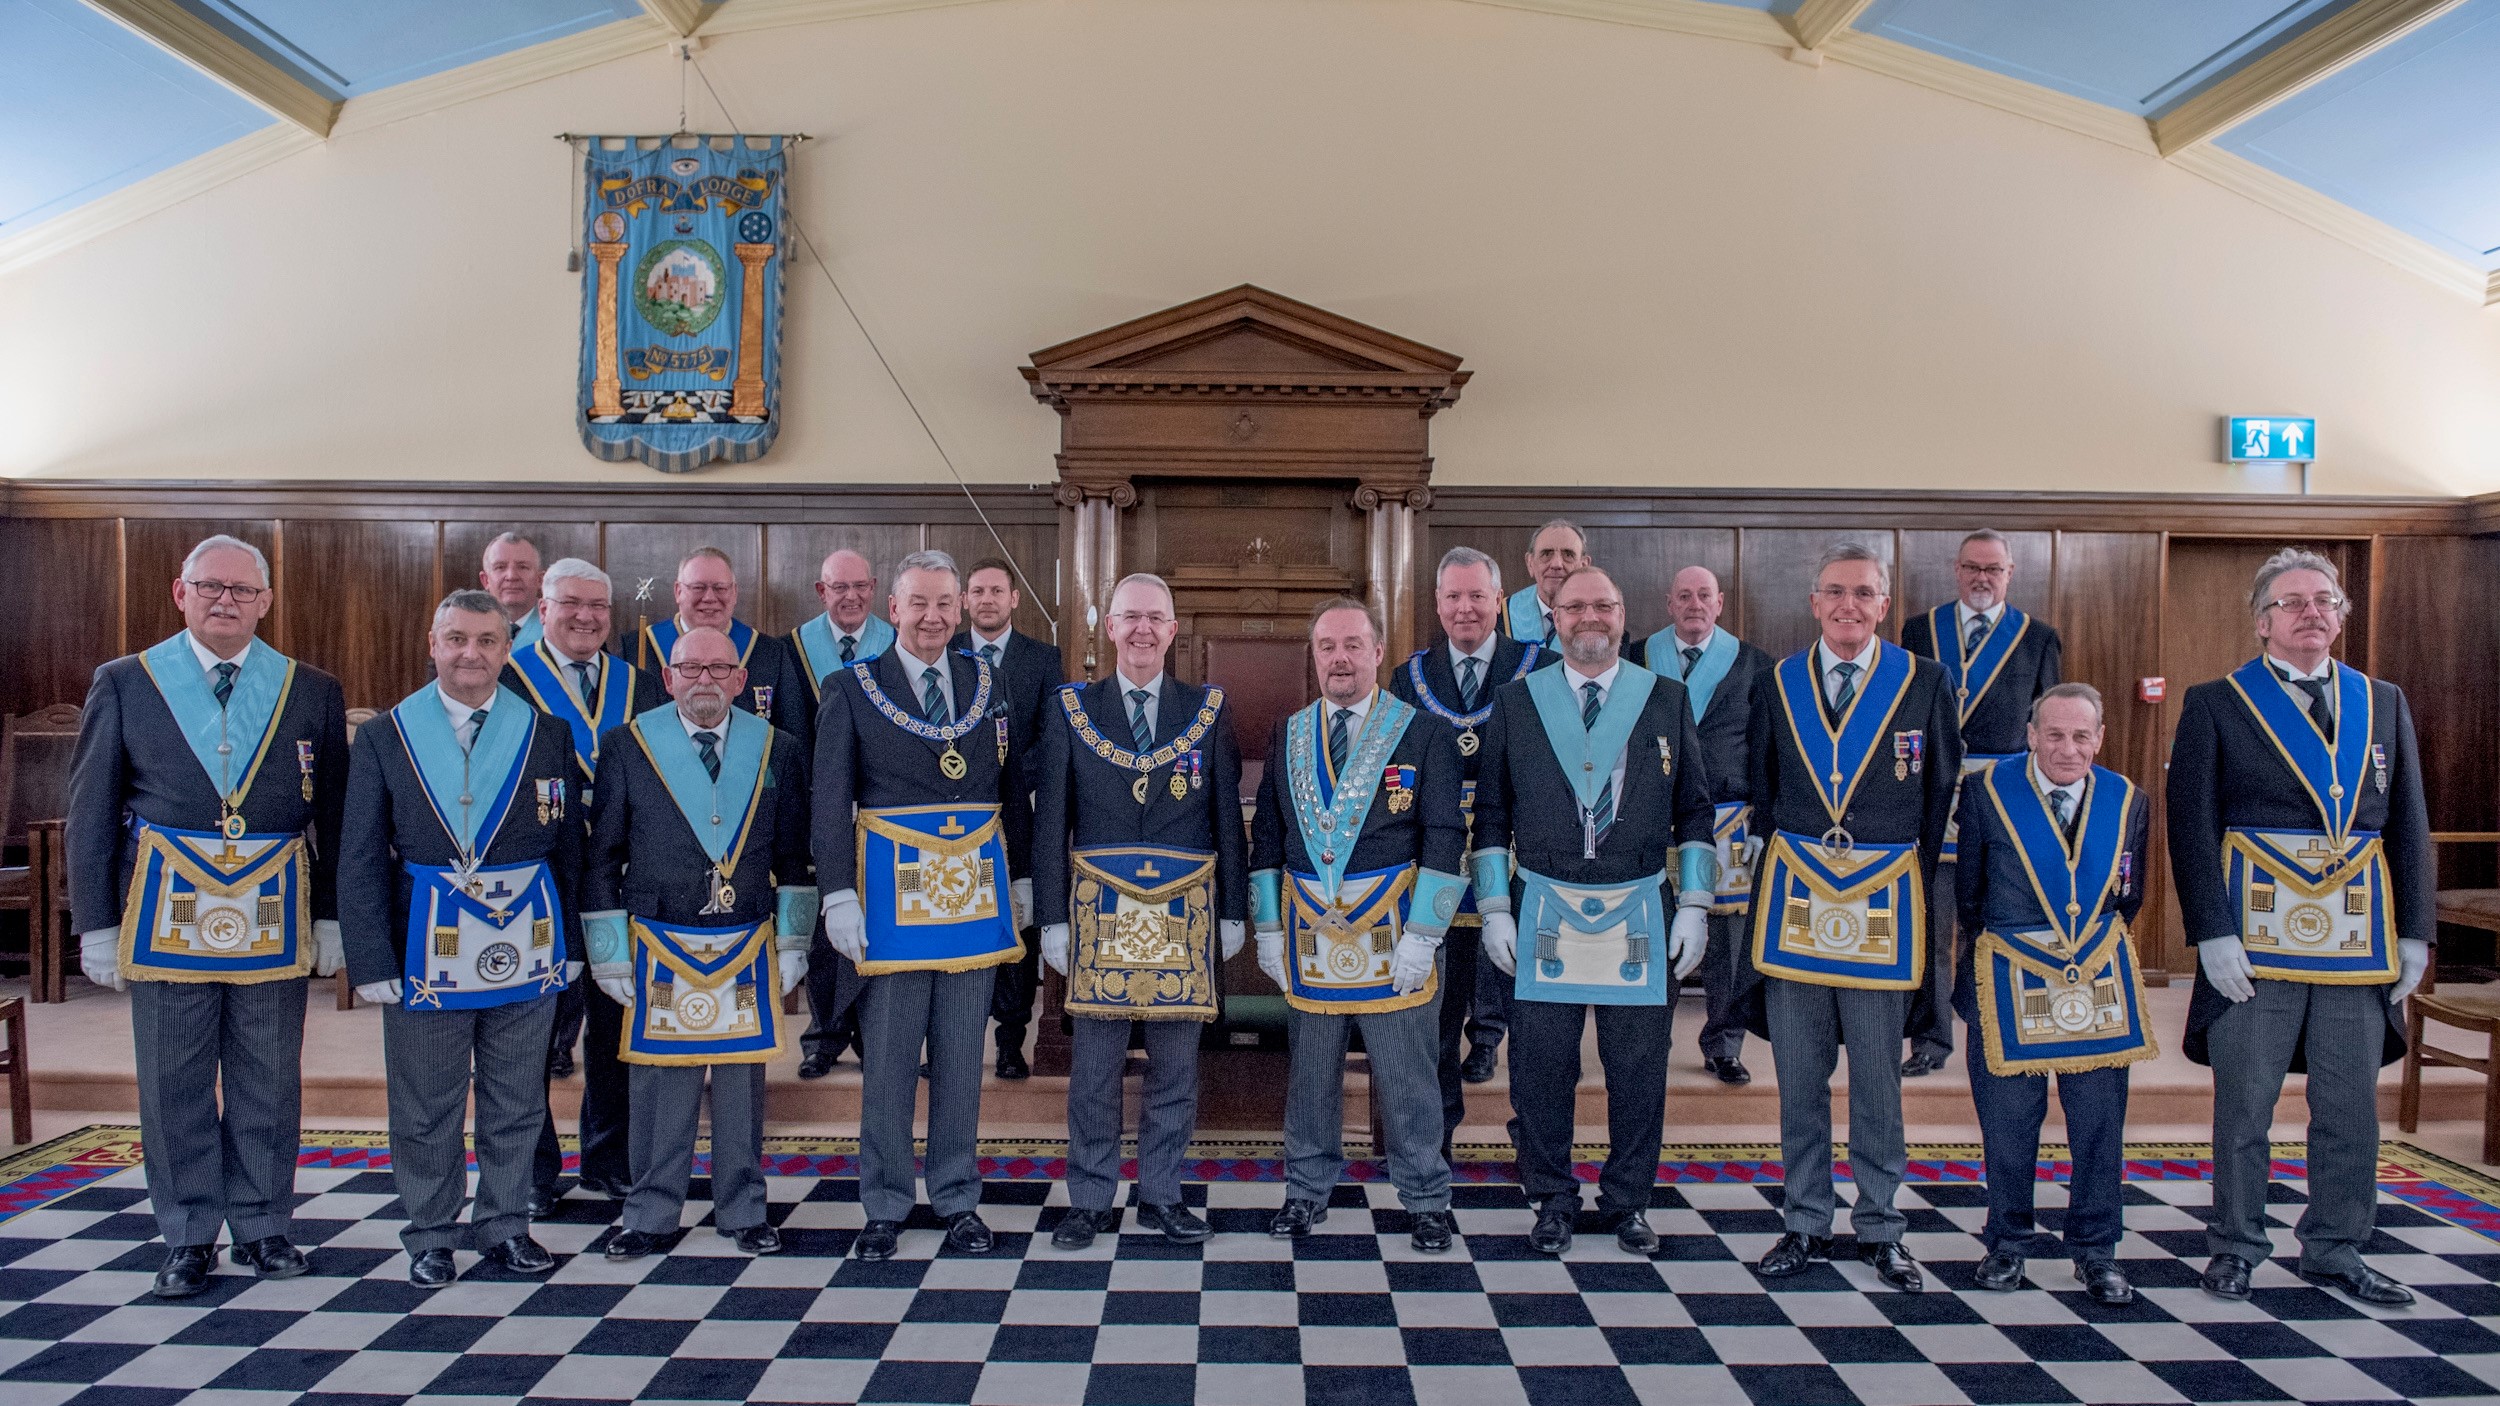 Worcestershire Freemasons during a four ceremonies in a day event